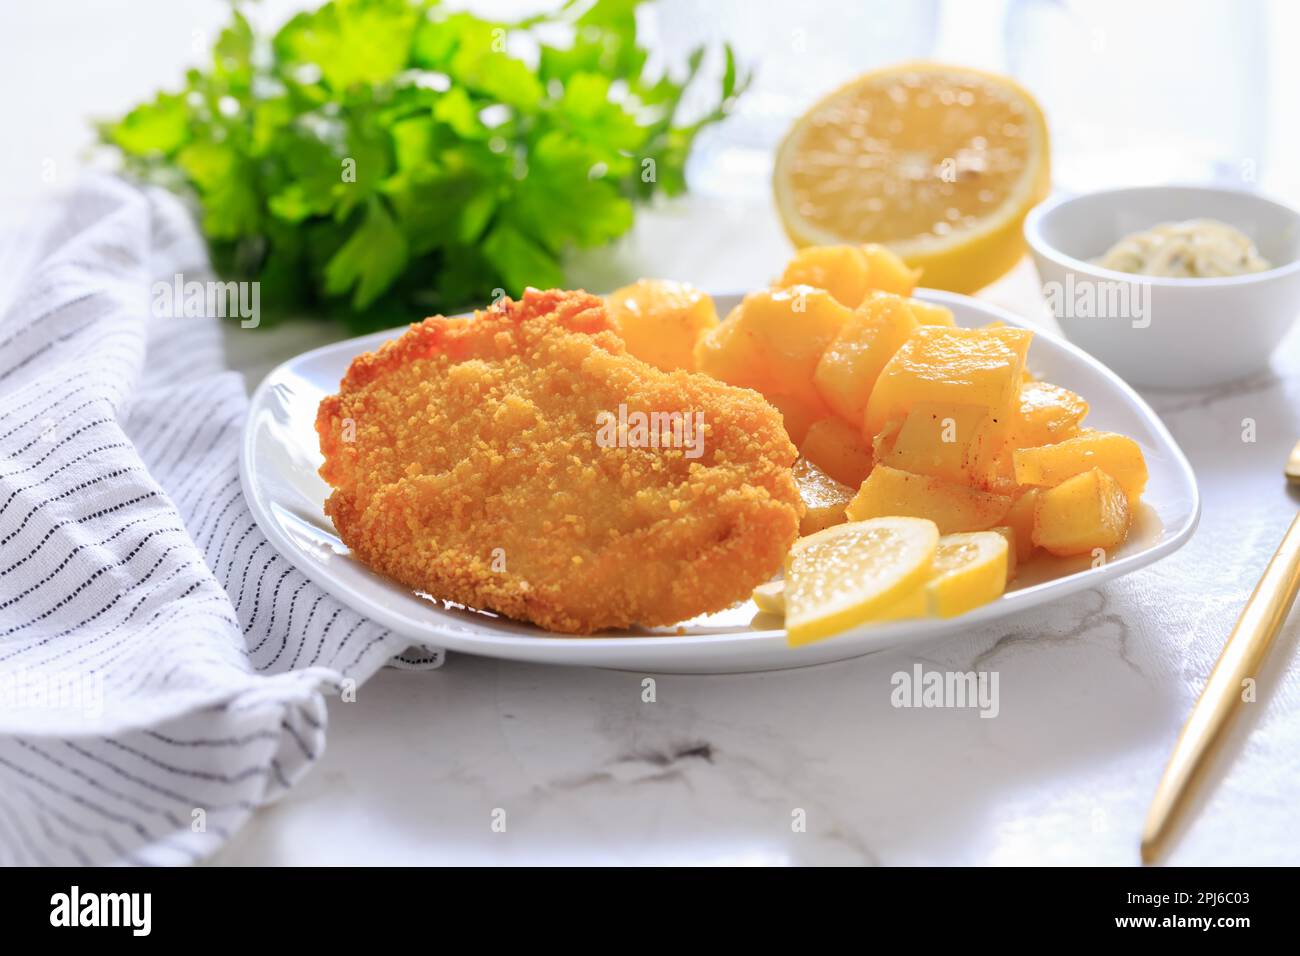 Homemade chicken escalope with baked potatoes, mayonnaise and lemon Stock Photo